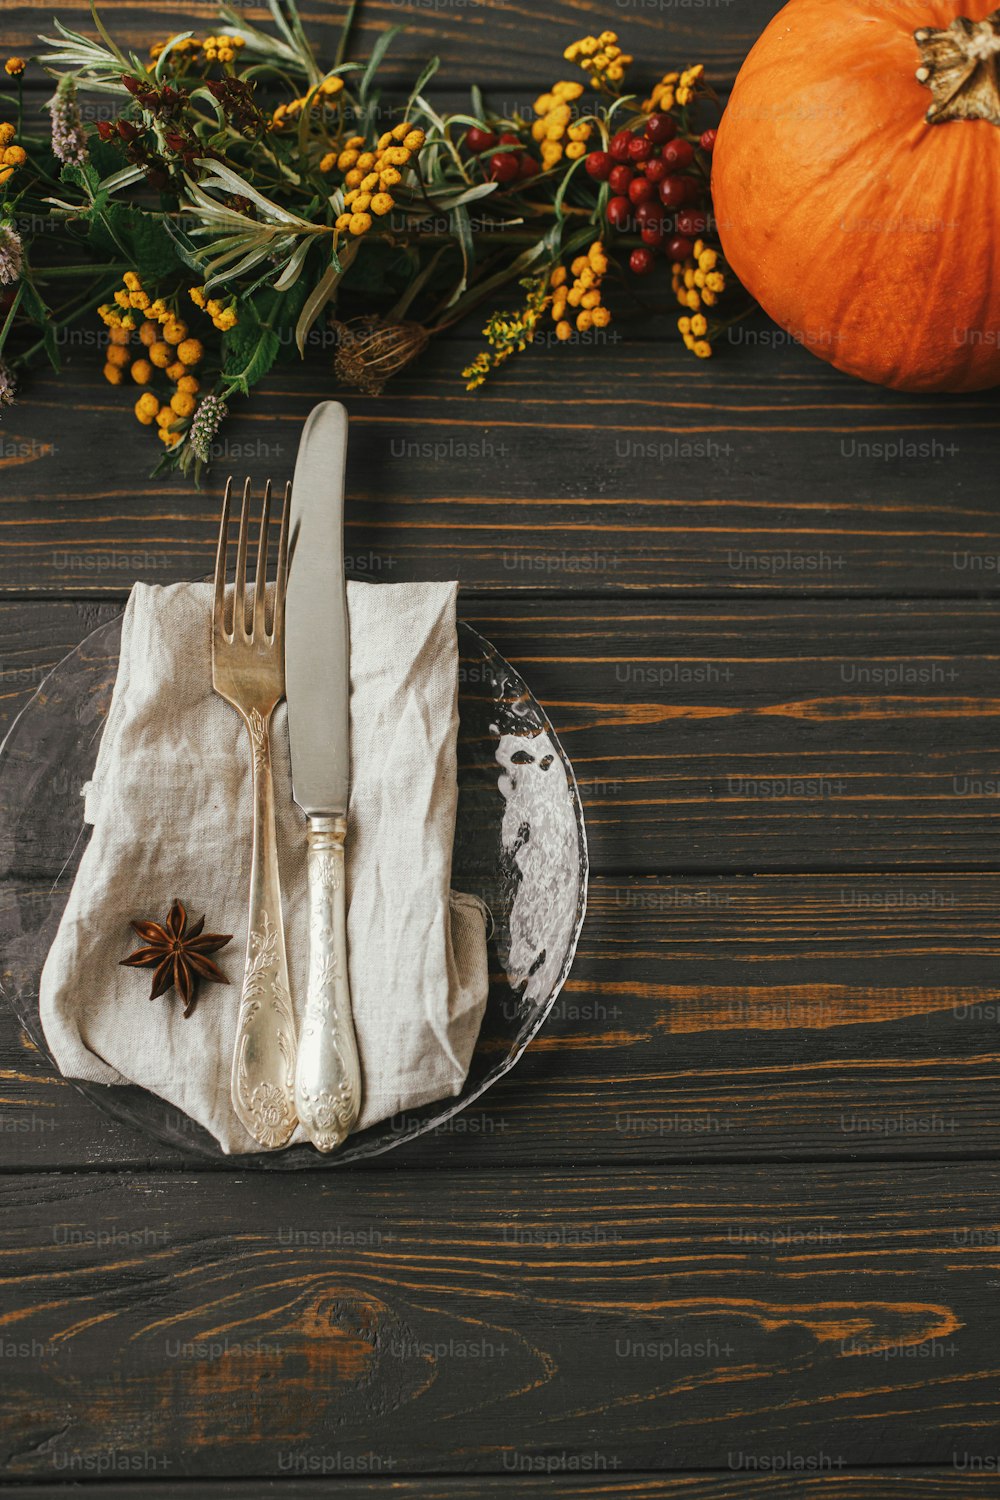 Stylish Thanksgiving dinner table setting. Modern plate with vintage cutlery, linen napkin with anise on wooden table with pumpkins and autumn flowers decoration. Farmhouse rustic autumn wedding